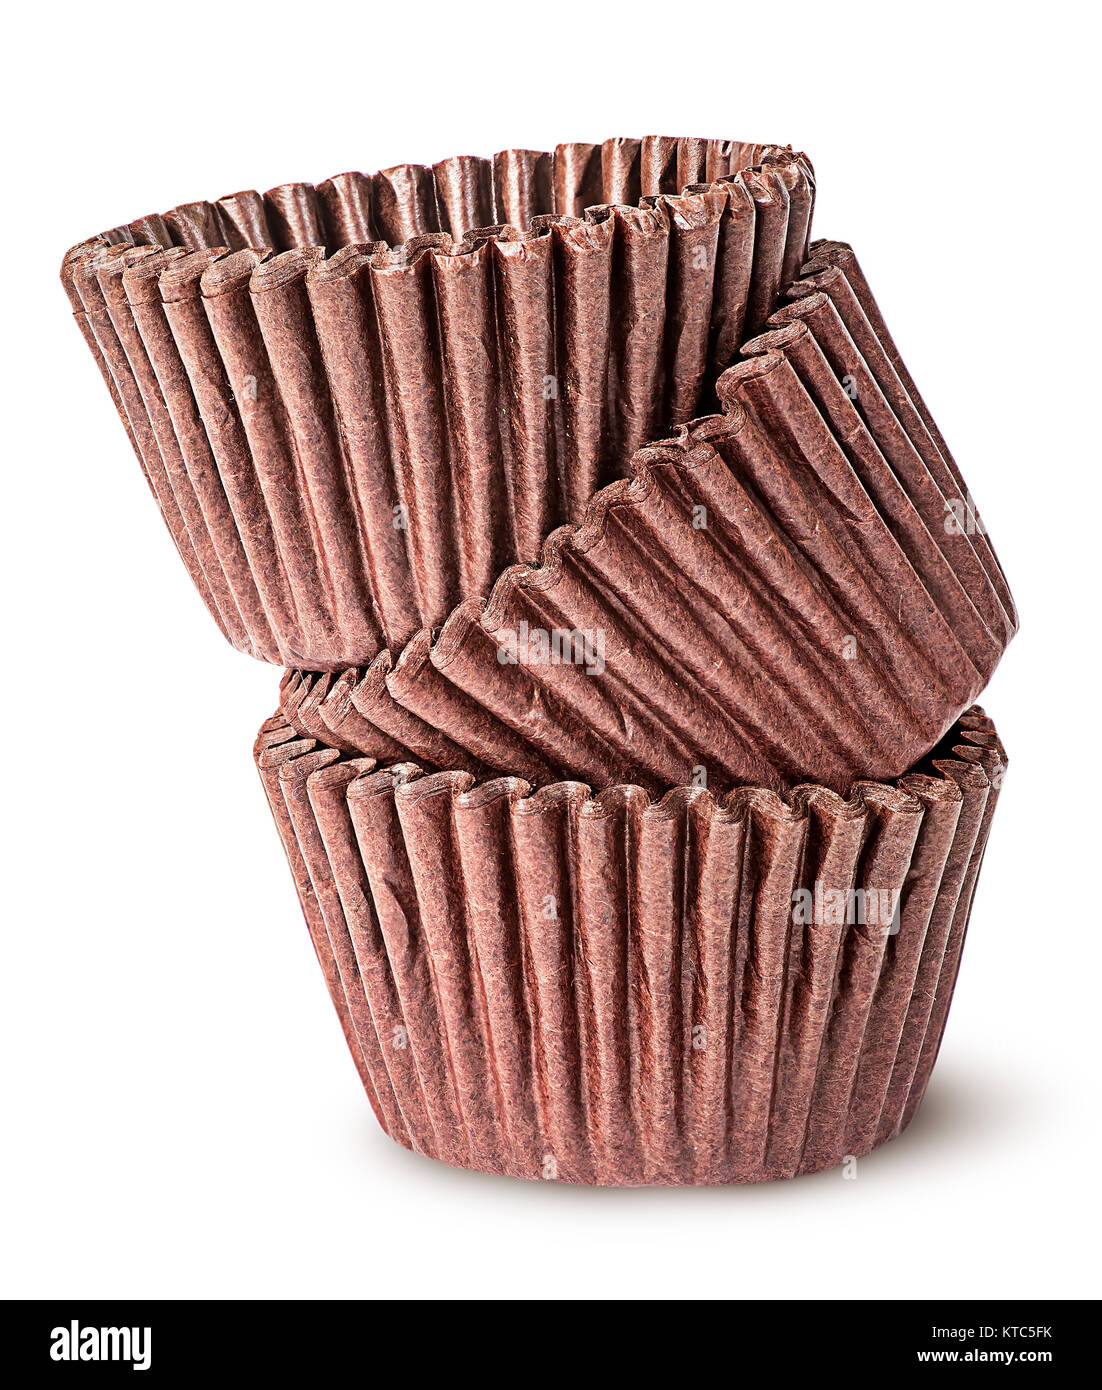 Heap of brown paper cups for baking muffins Stock Photo